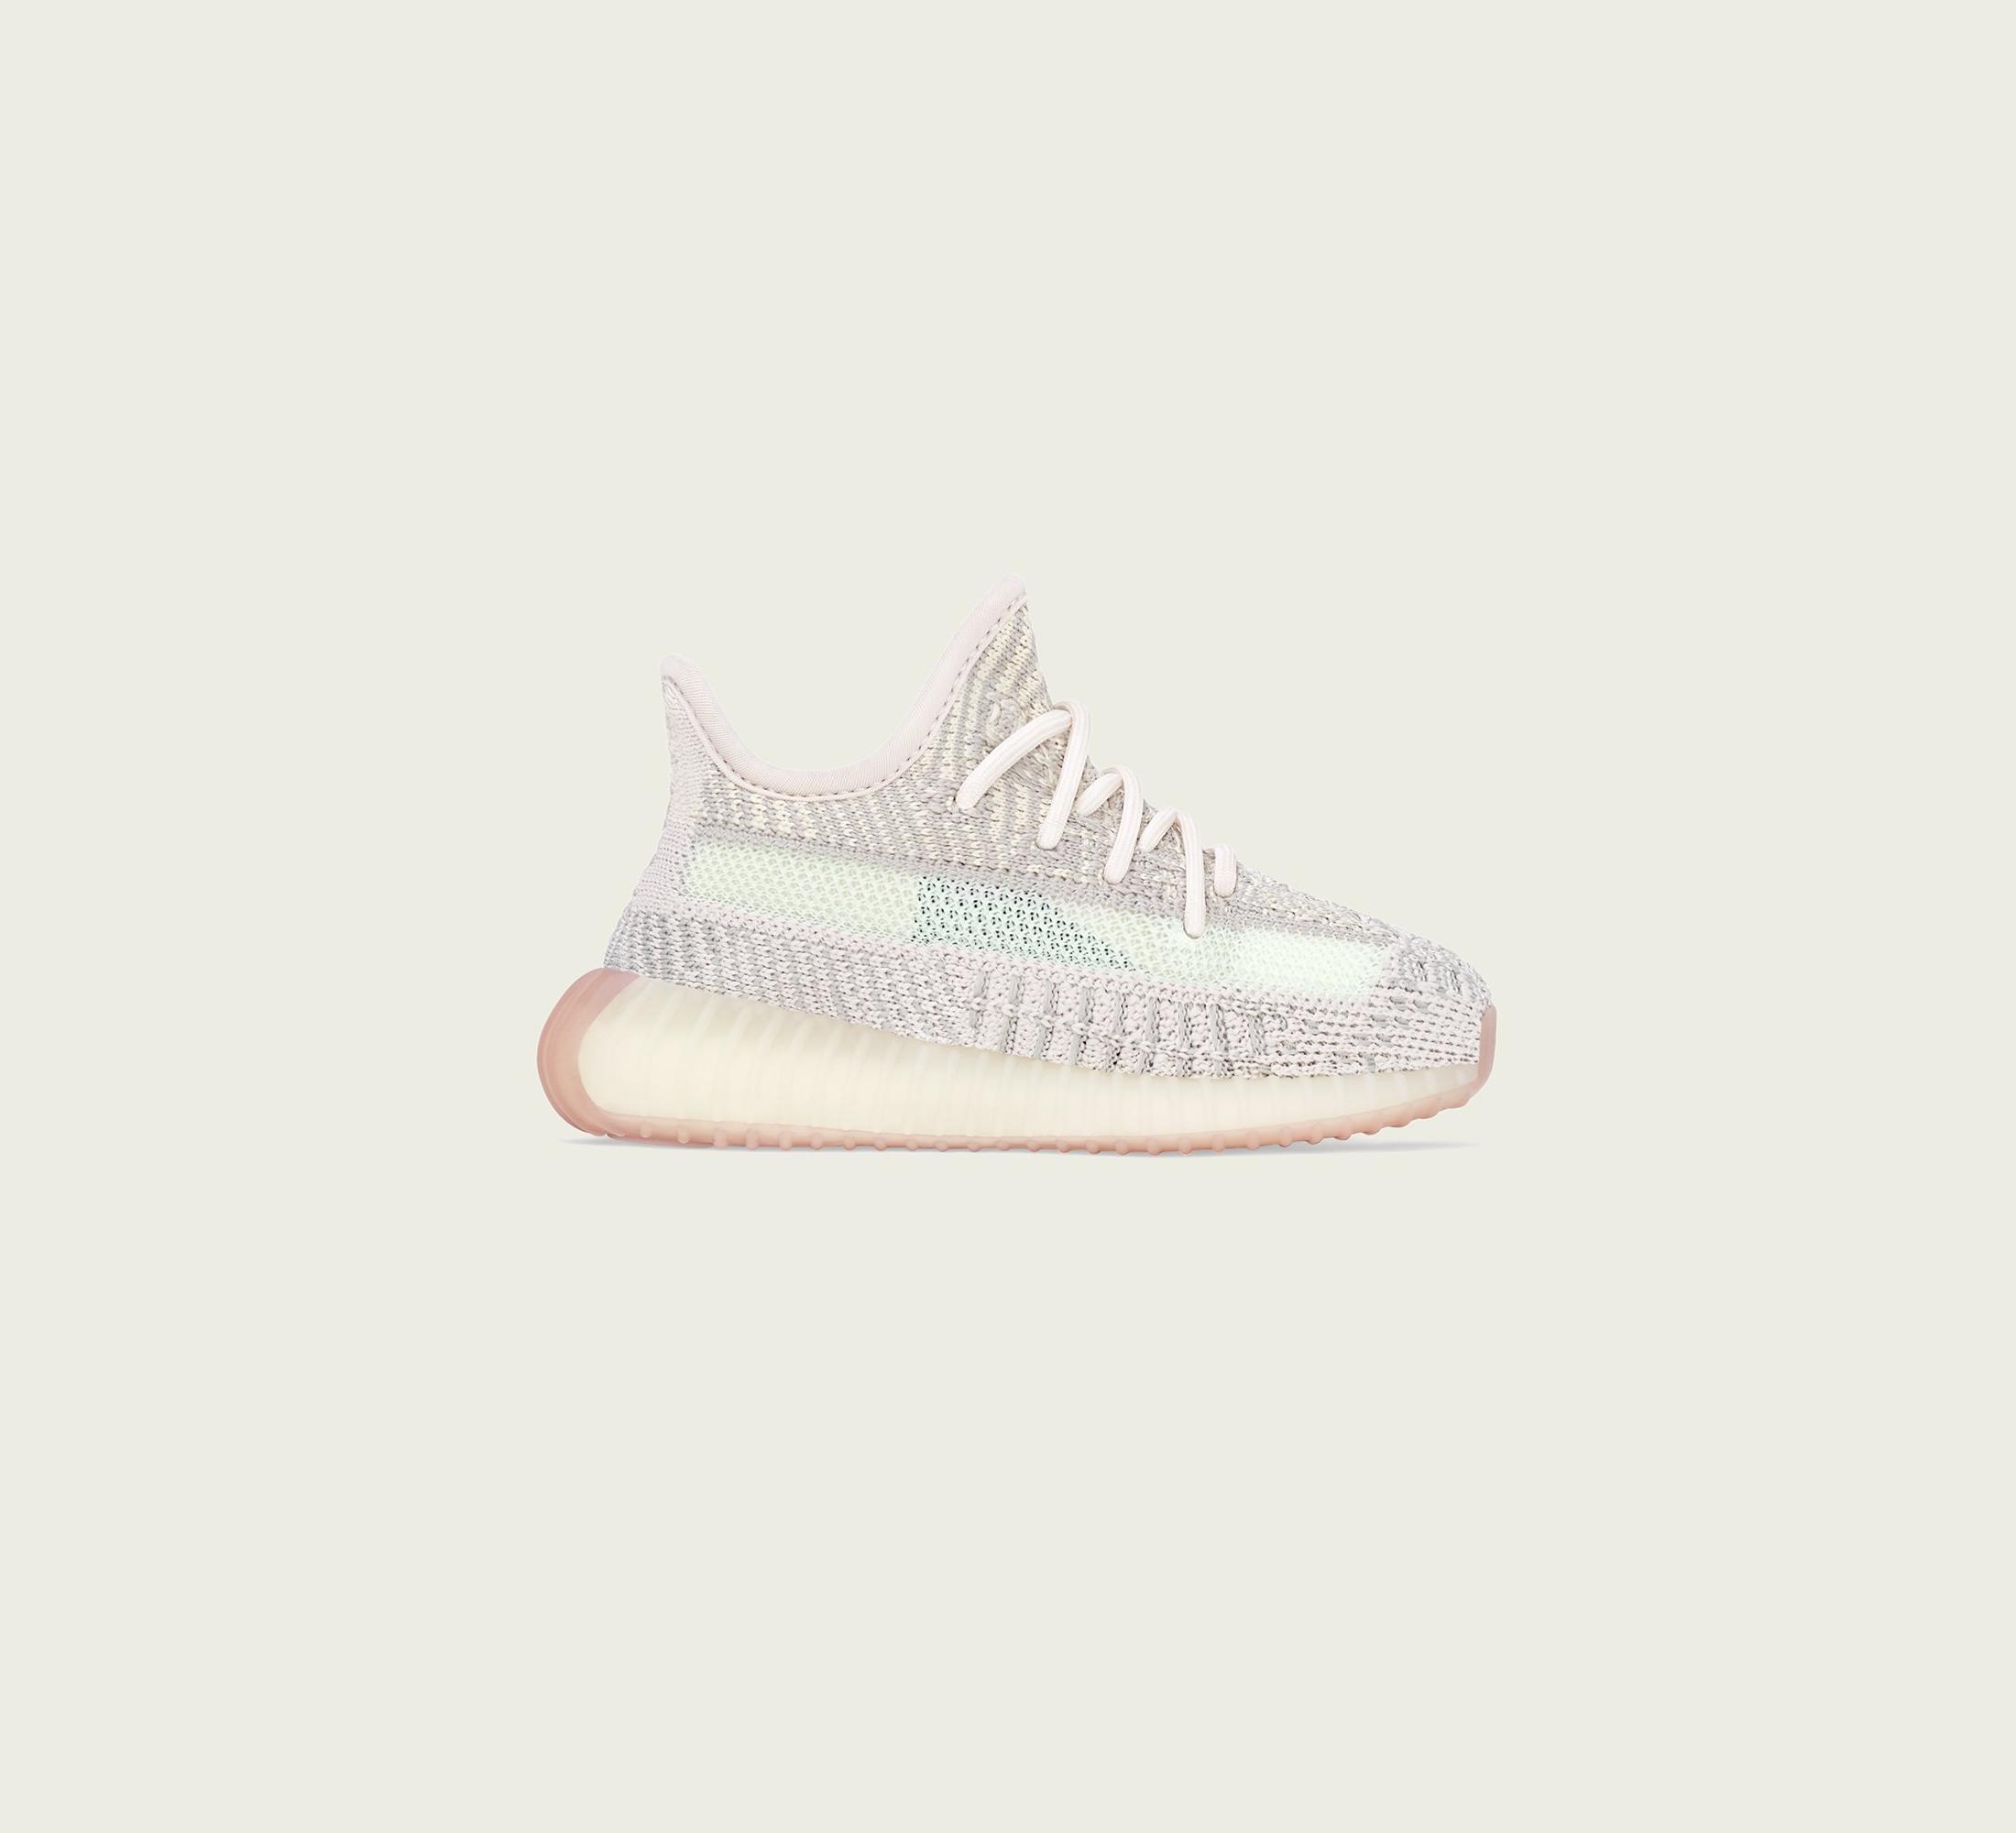 Cheap Adidas Yeezy Boost 350 V2 Men Natural Abez Fz5246 In Hand Amp Ship Out Next Day